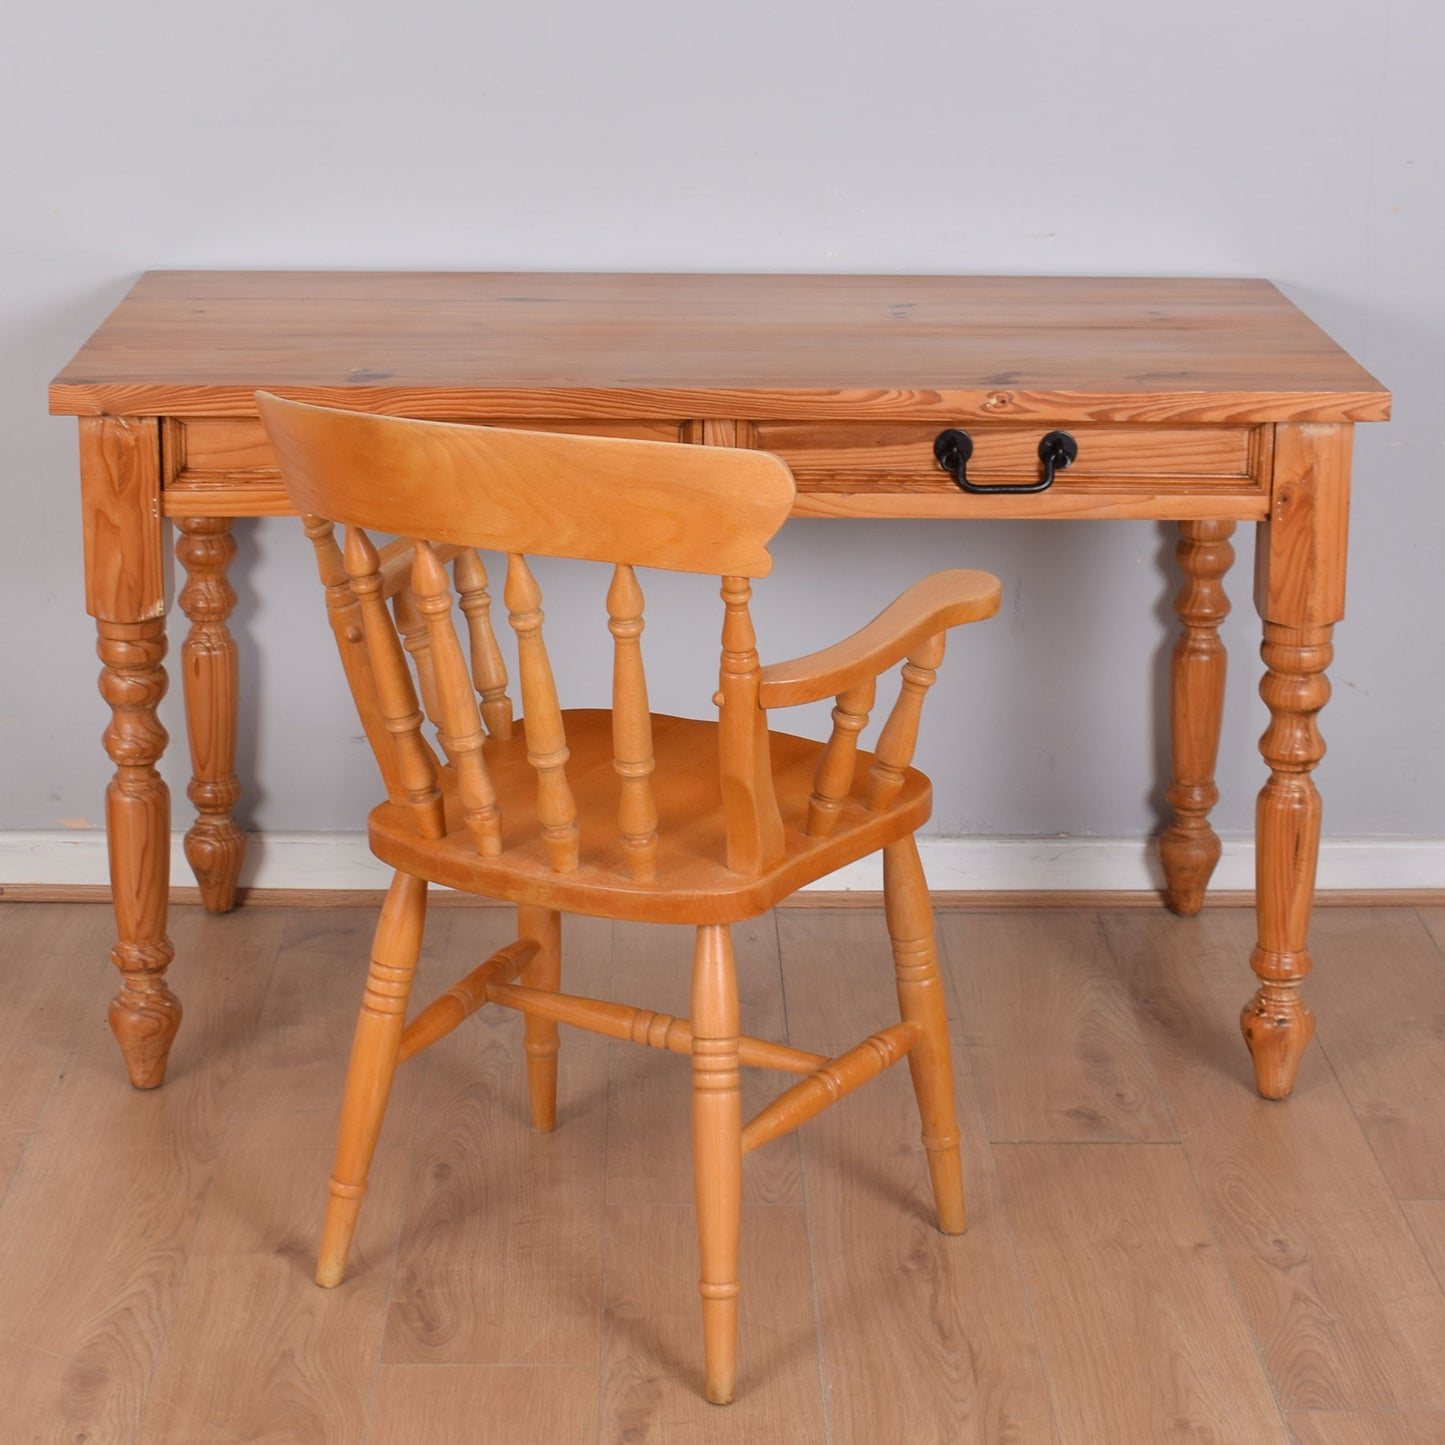 Restored Pine Desk and Chair